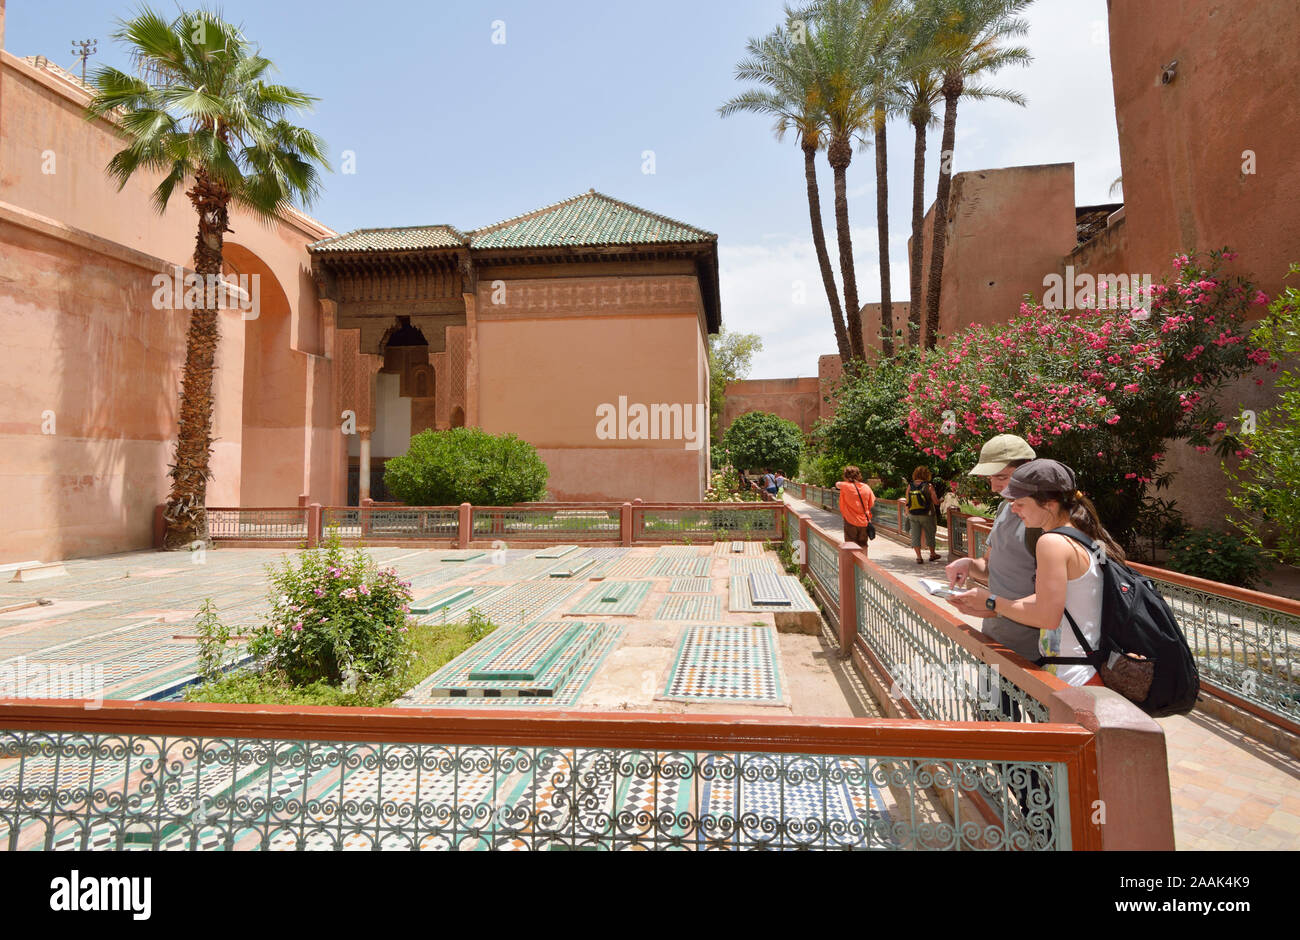 The Saadian Tombs, dating back to the 16th century, are the final resting place of about sixty members of the Saadi Dynasty. Marrakech, Morocco Stock Photo